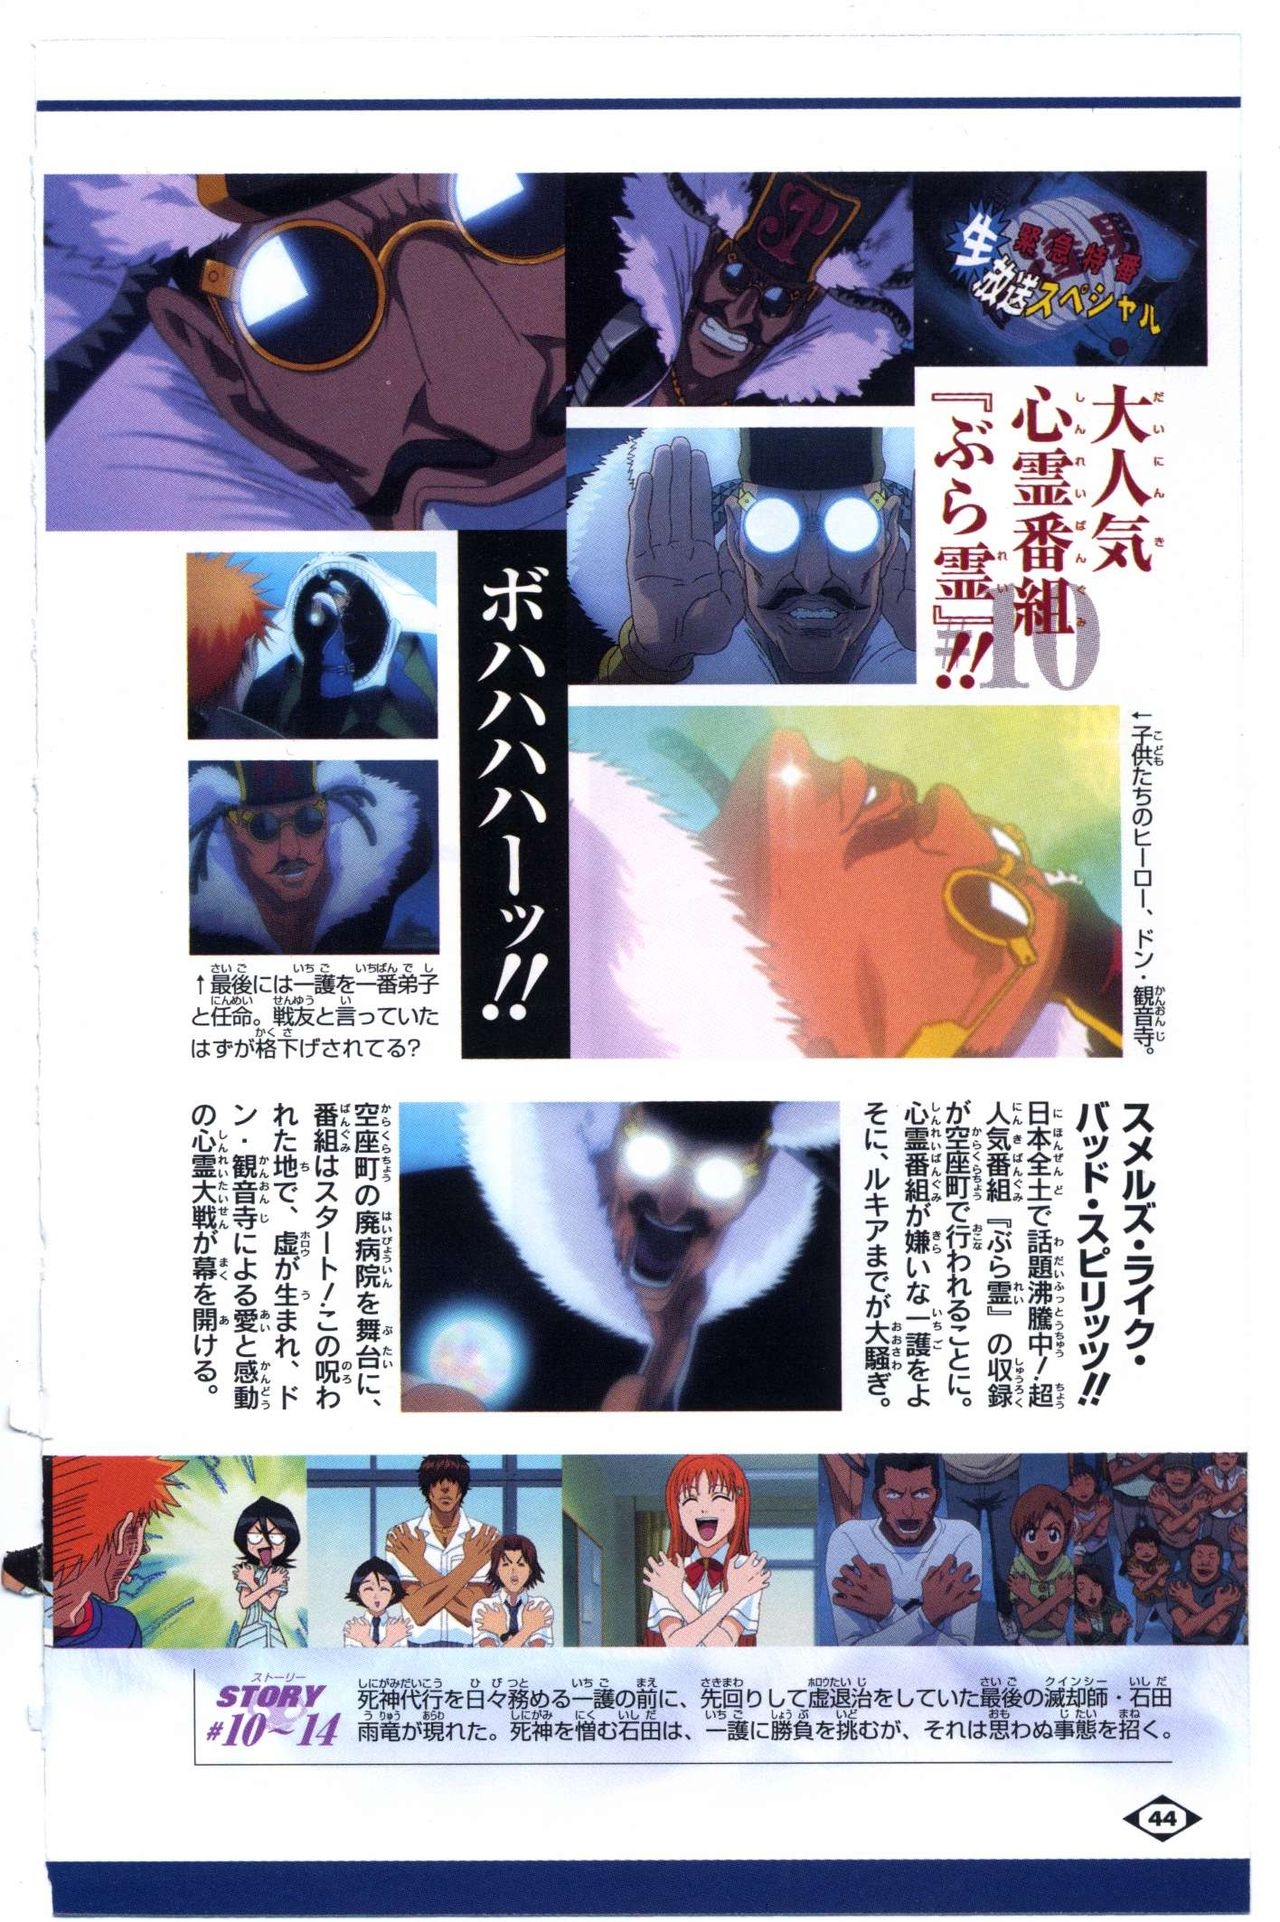 Bleach: Official Animation Book VIBEs 44